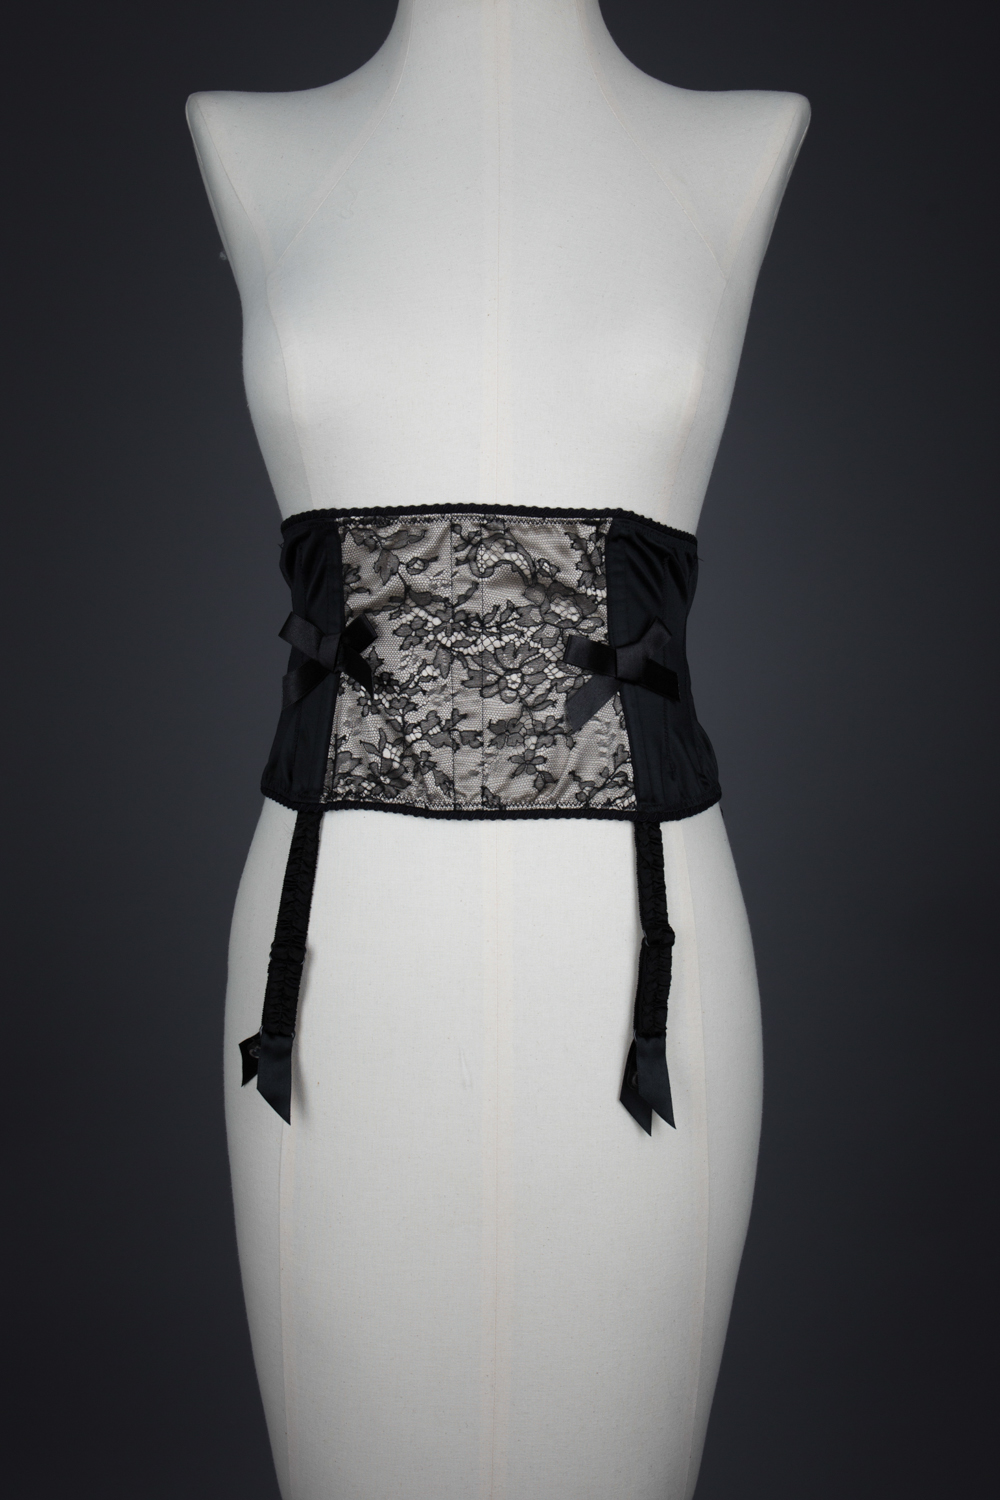 Leavers Lace & Stretch Satin Waist Cincher By Cadolle, c. 2000s, France. The Underpinnings Museum. Photography by Tigz Rice.